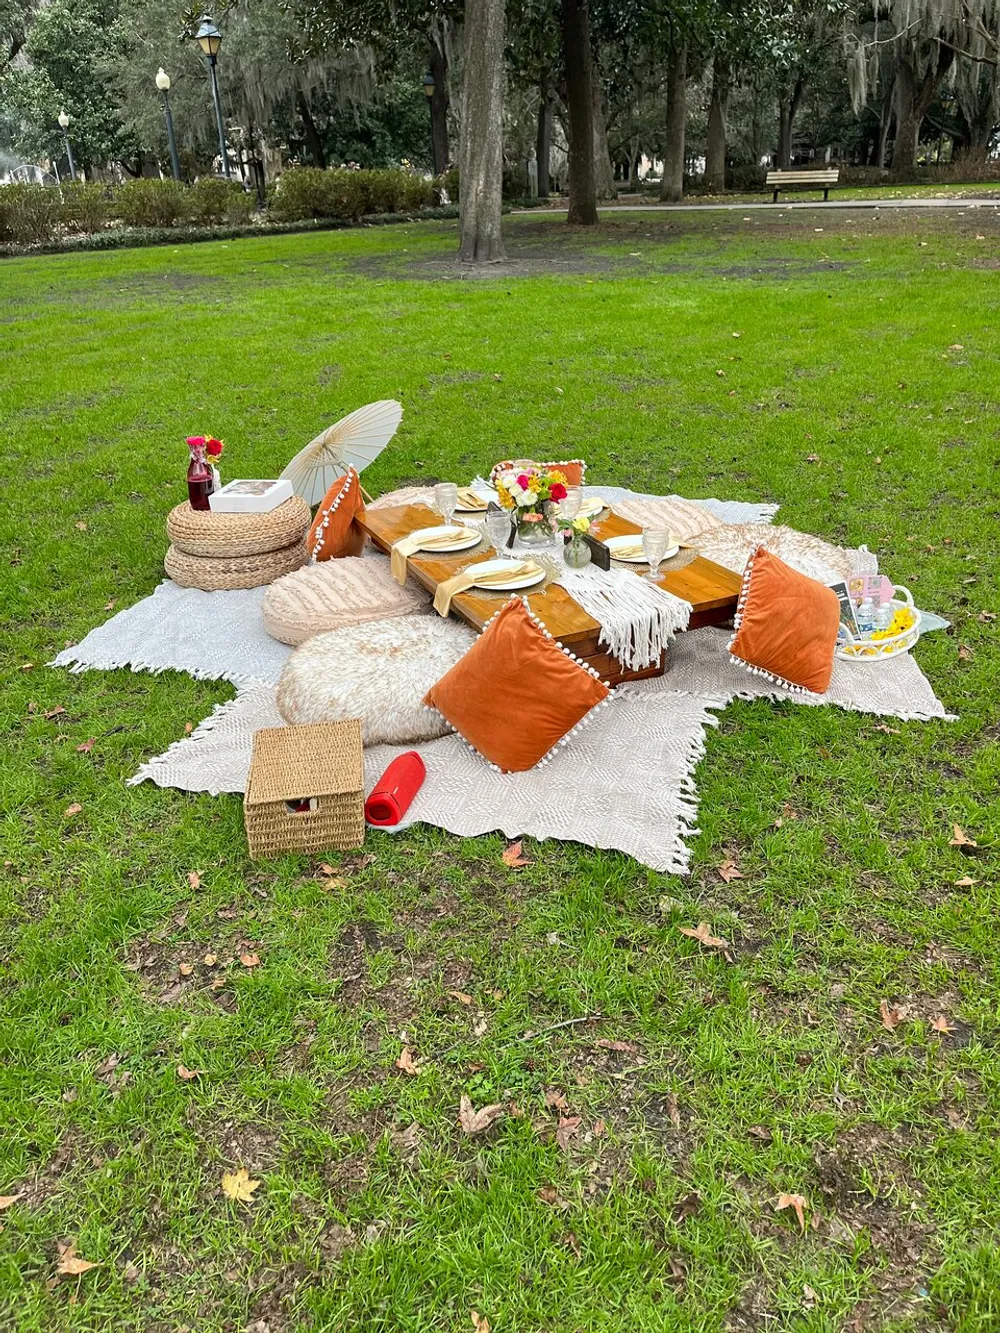 A cozy outdoor picnic setup on blankets with cushions plates flowers and baskets awaits in a park setting